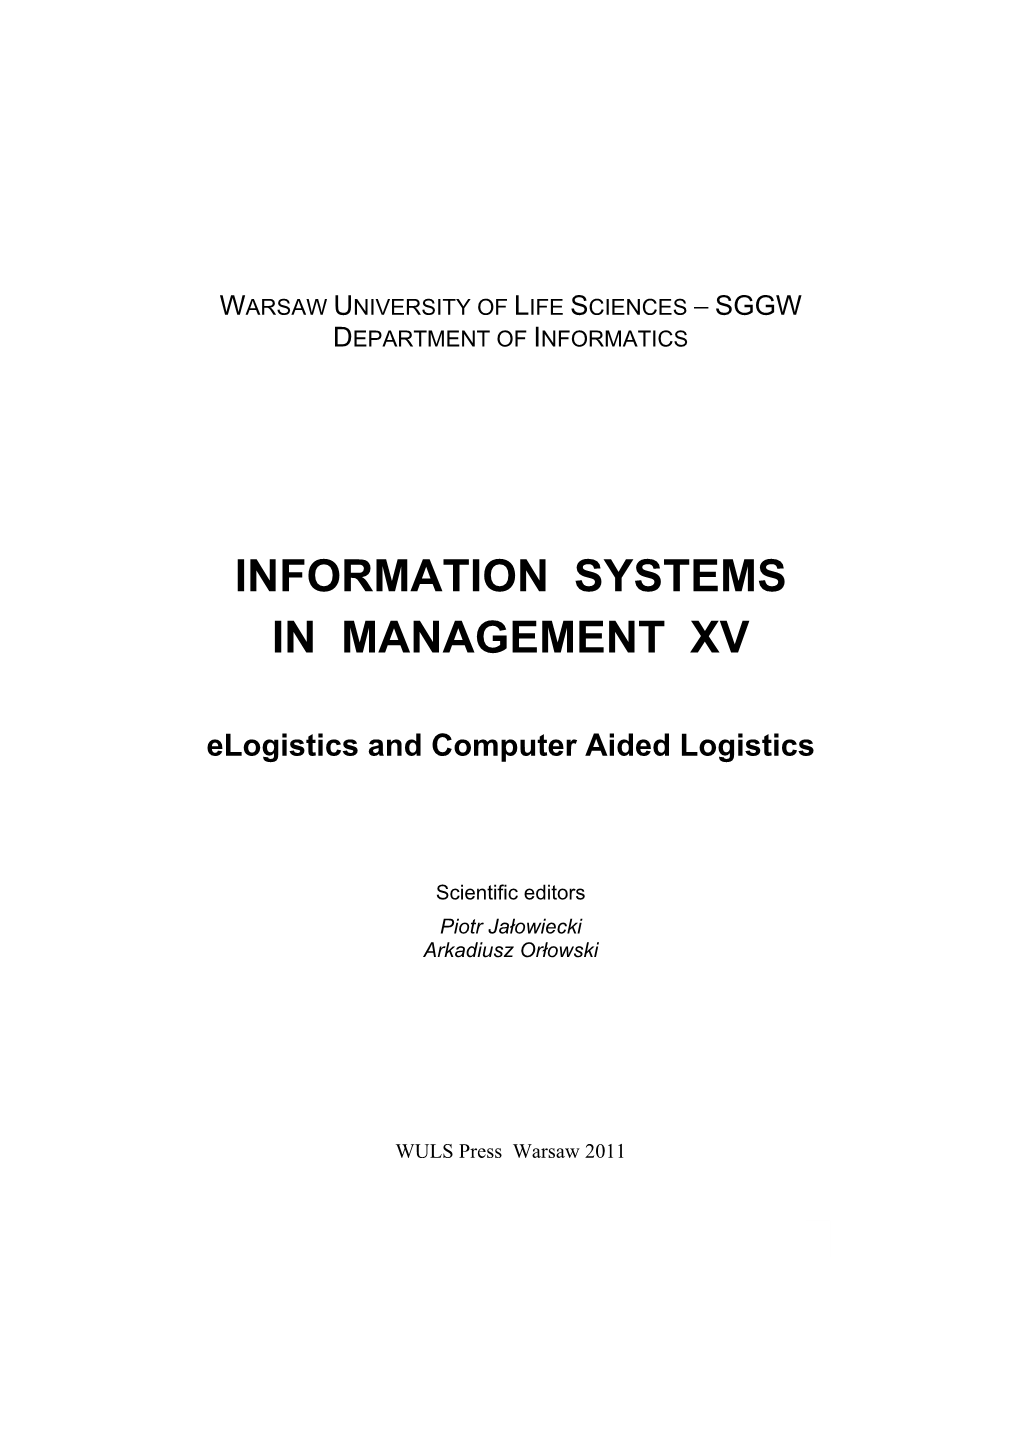 Information Systems in Management Xv